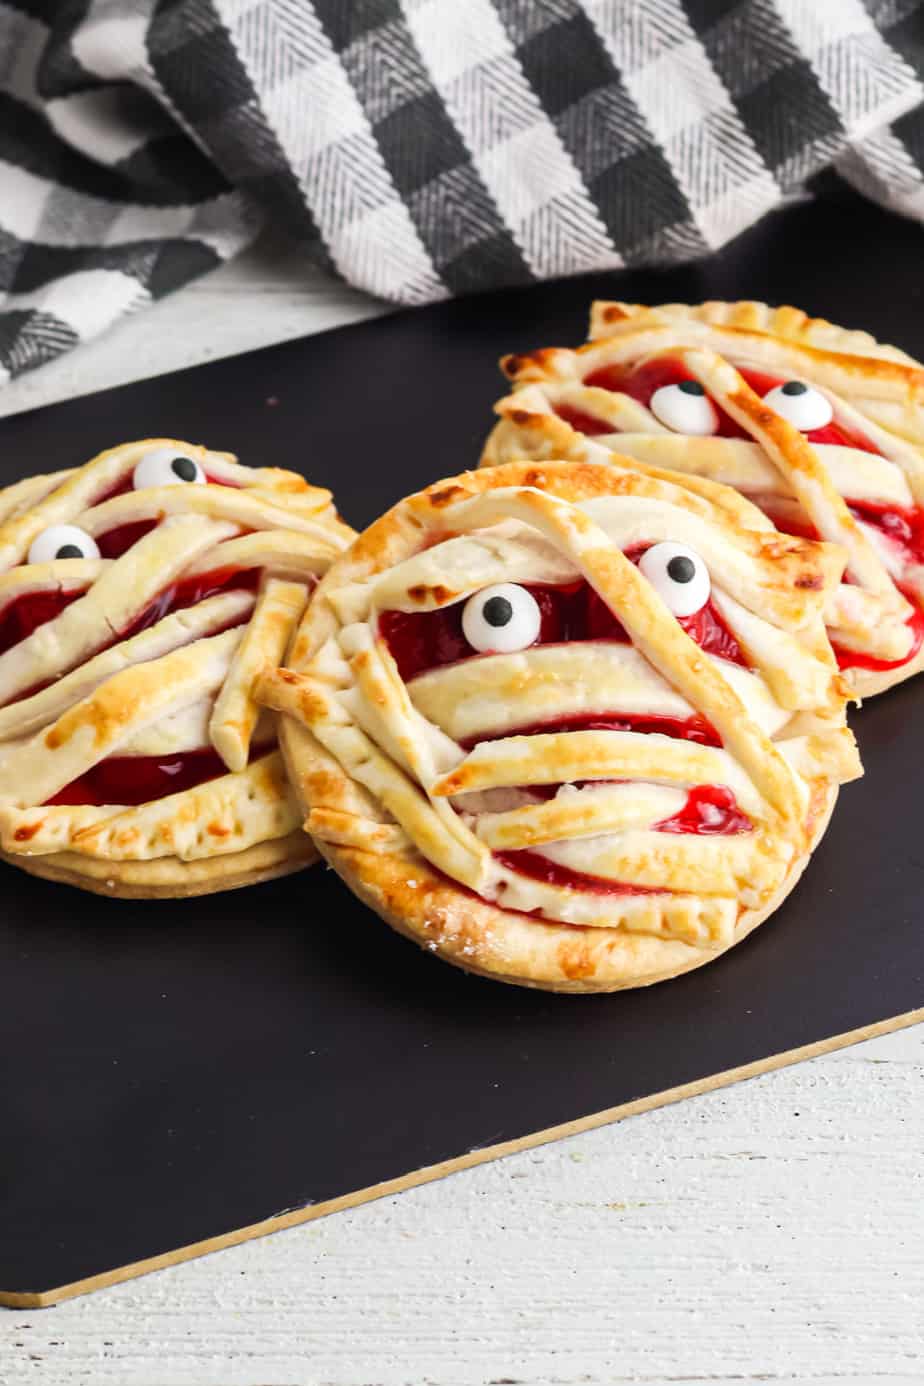 round cherry hand pies that have been baked and decorated to look like mummy faces